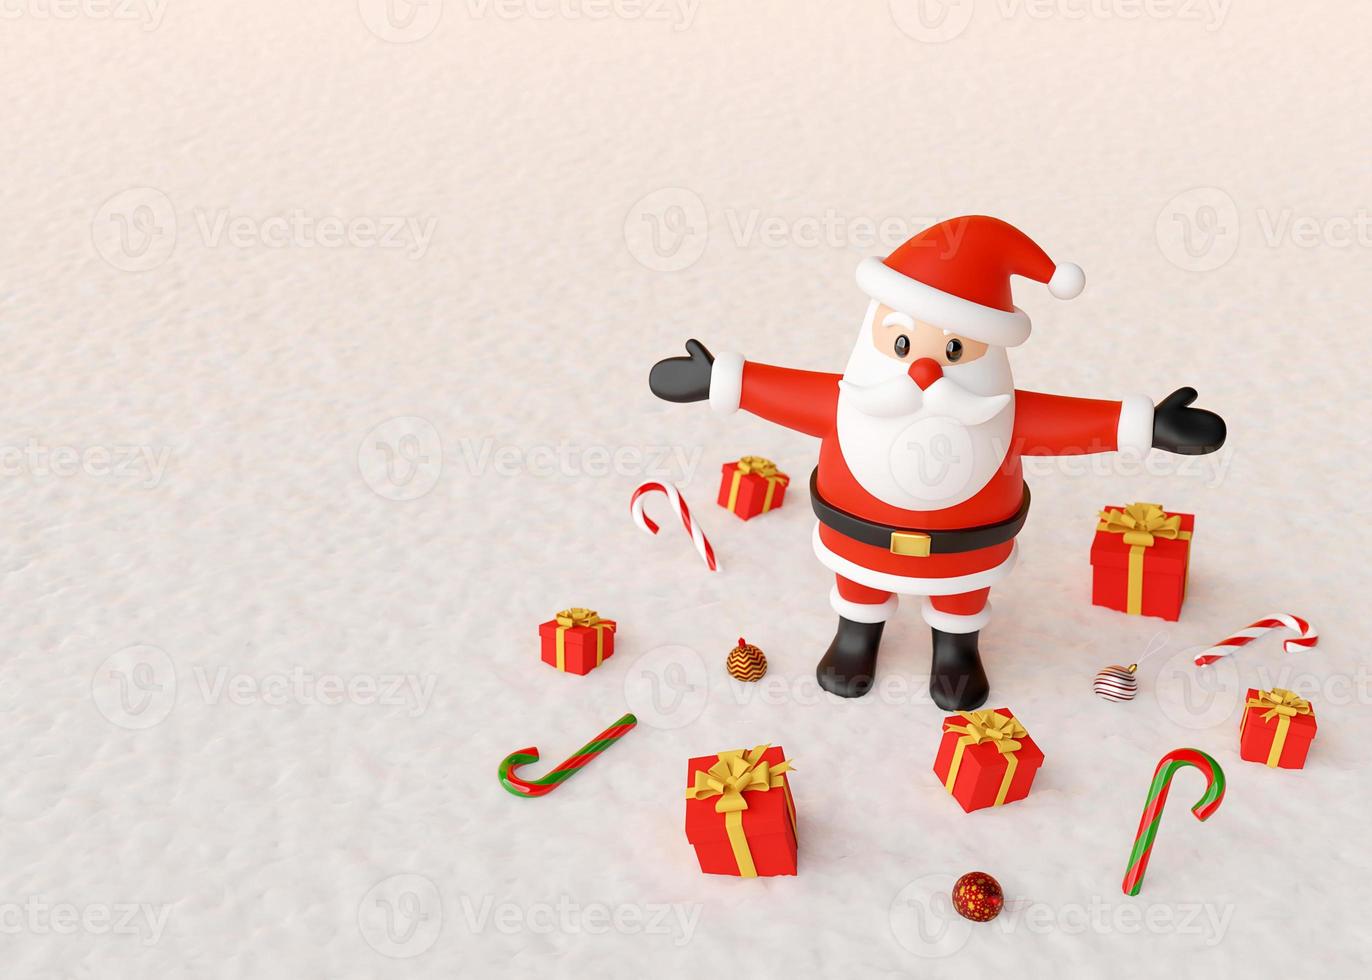 Merry Christmas, Santa Claus standing with gifts and Christmas ornaments on a snow ground, 3d rendering photo